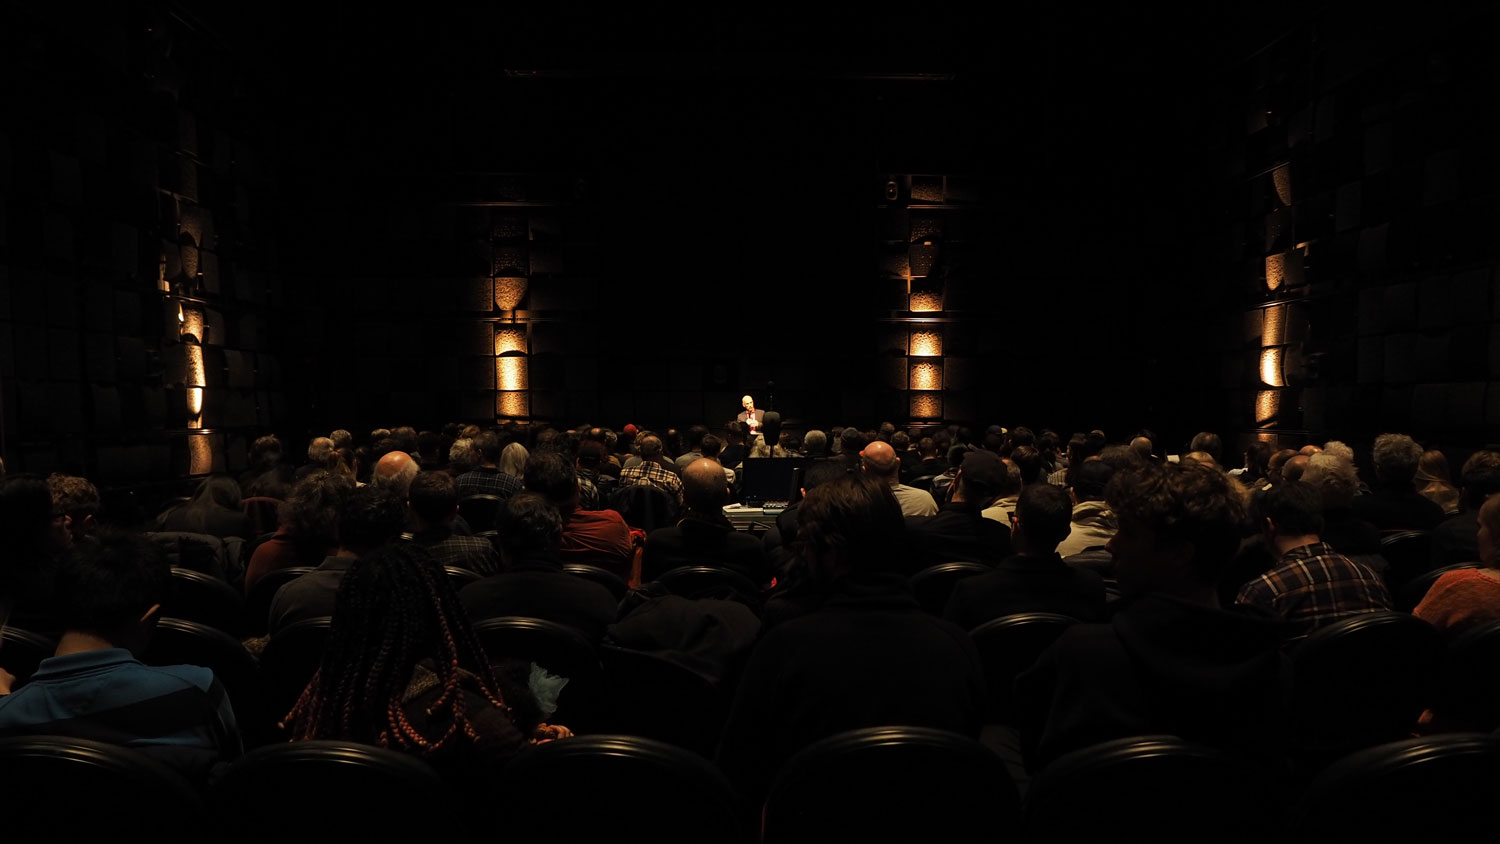 Hans Tutschku giving a lecture to a large crowd in a dark room. 